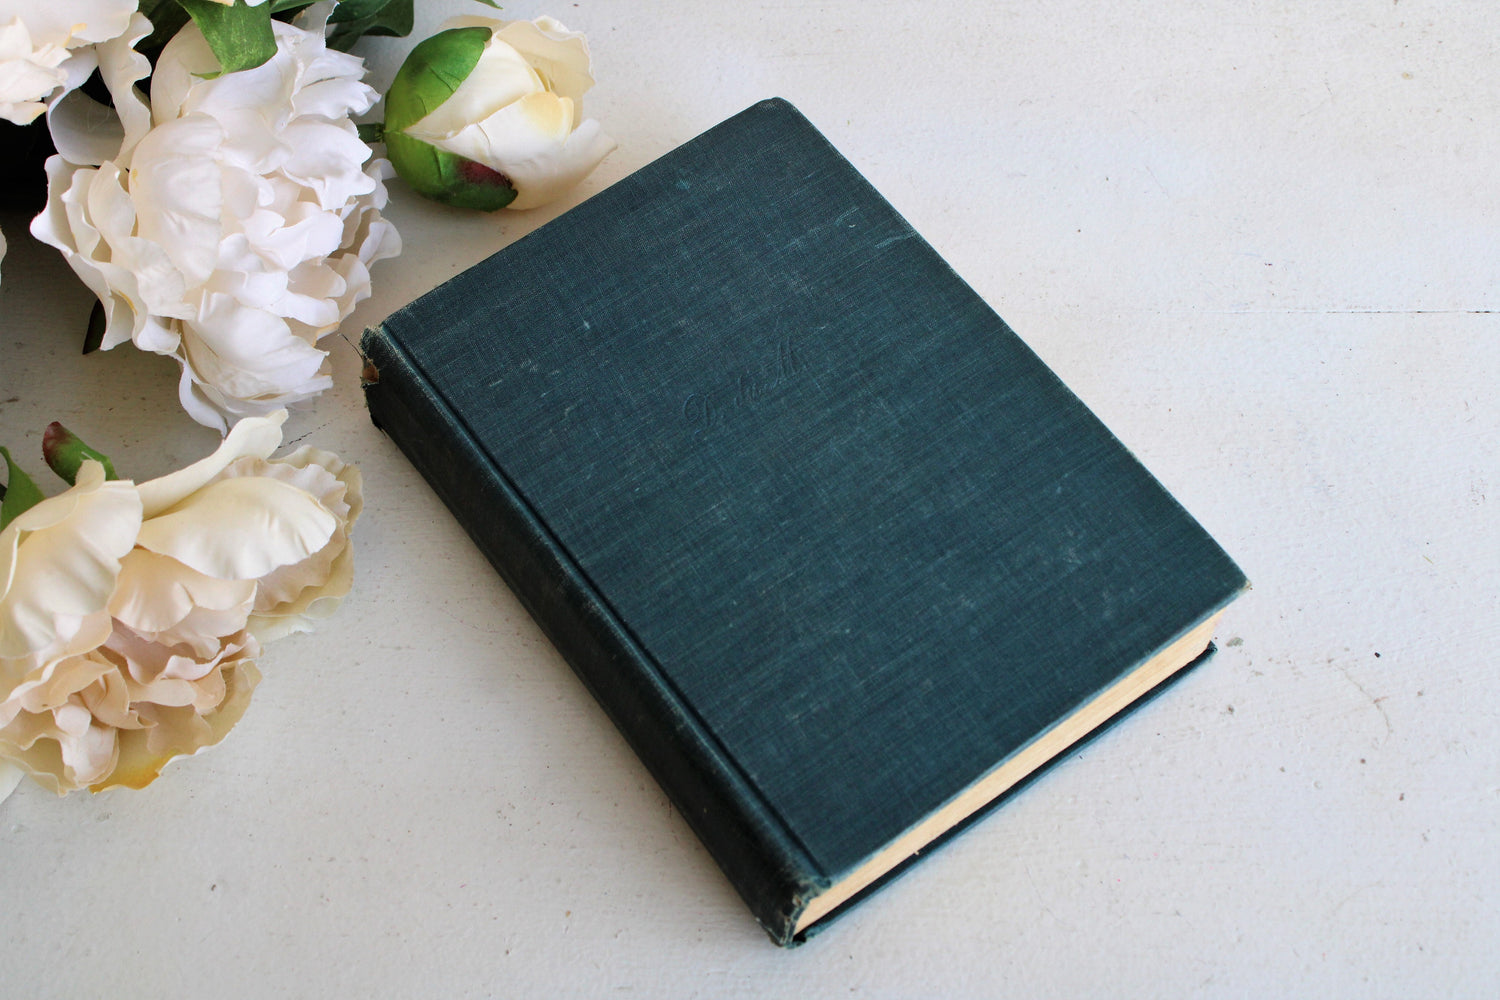 Vintage 1940s "Frenchman's Creek" by Daphne Du Maurier